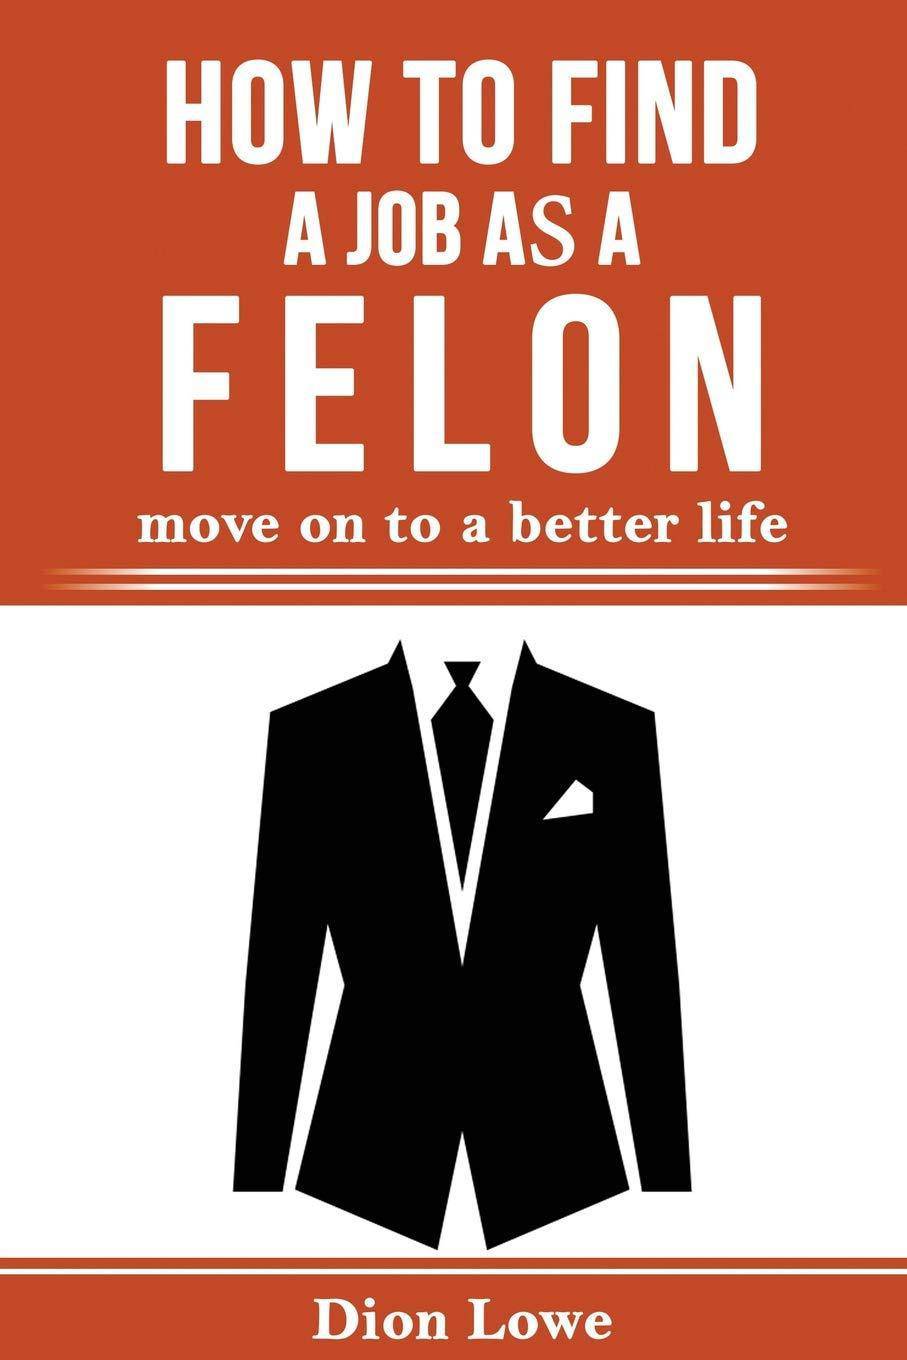 How to Find a Job as a Felon: move on to a better life - SureShot Books Publishing LLC